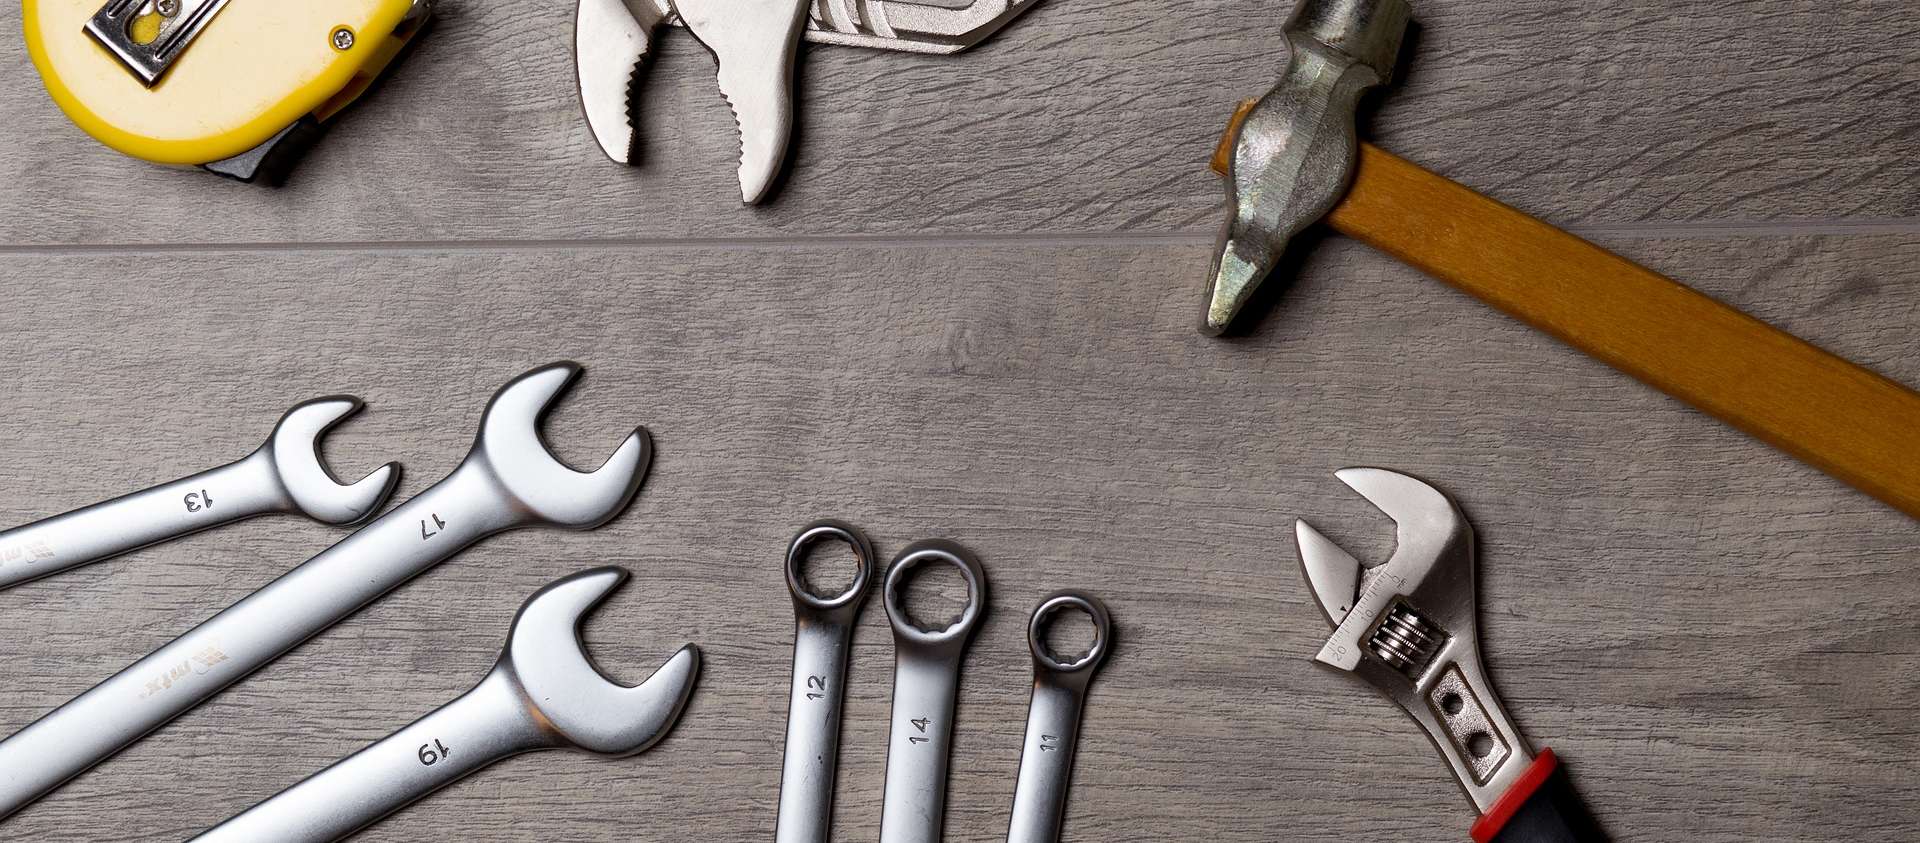 Tools on a worktable